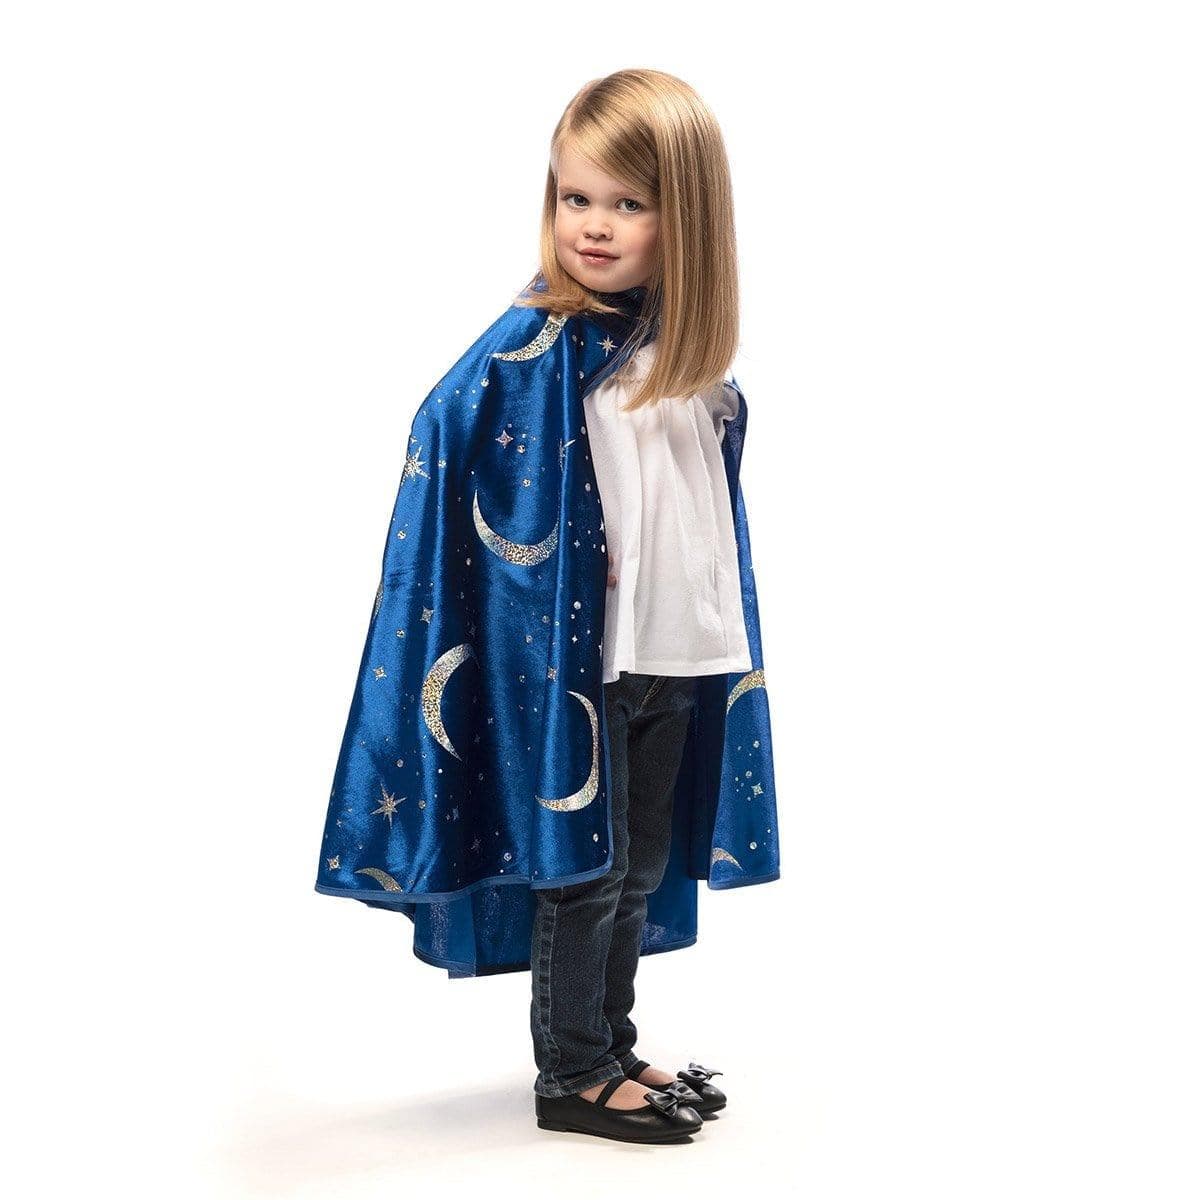 Buy Costume Accessories Wizard cape for kids sold at Party Expert